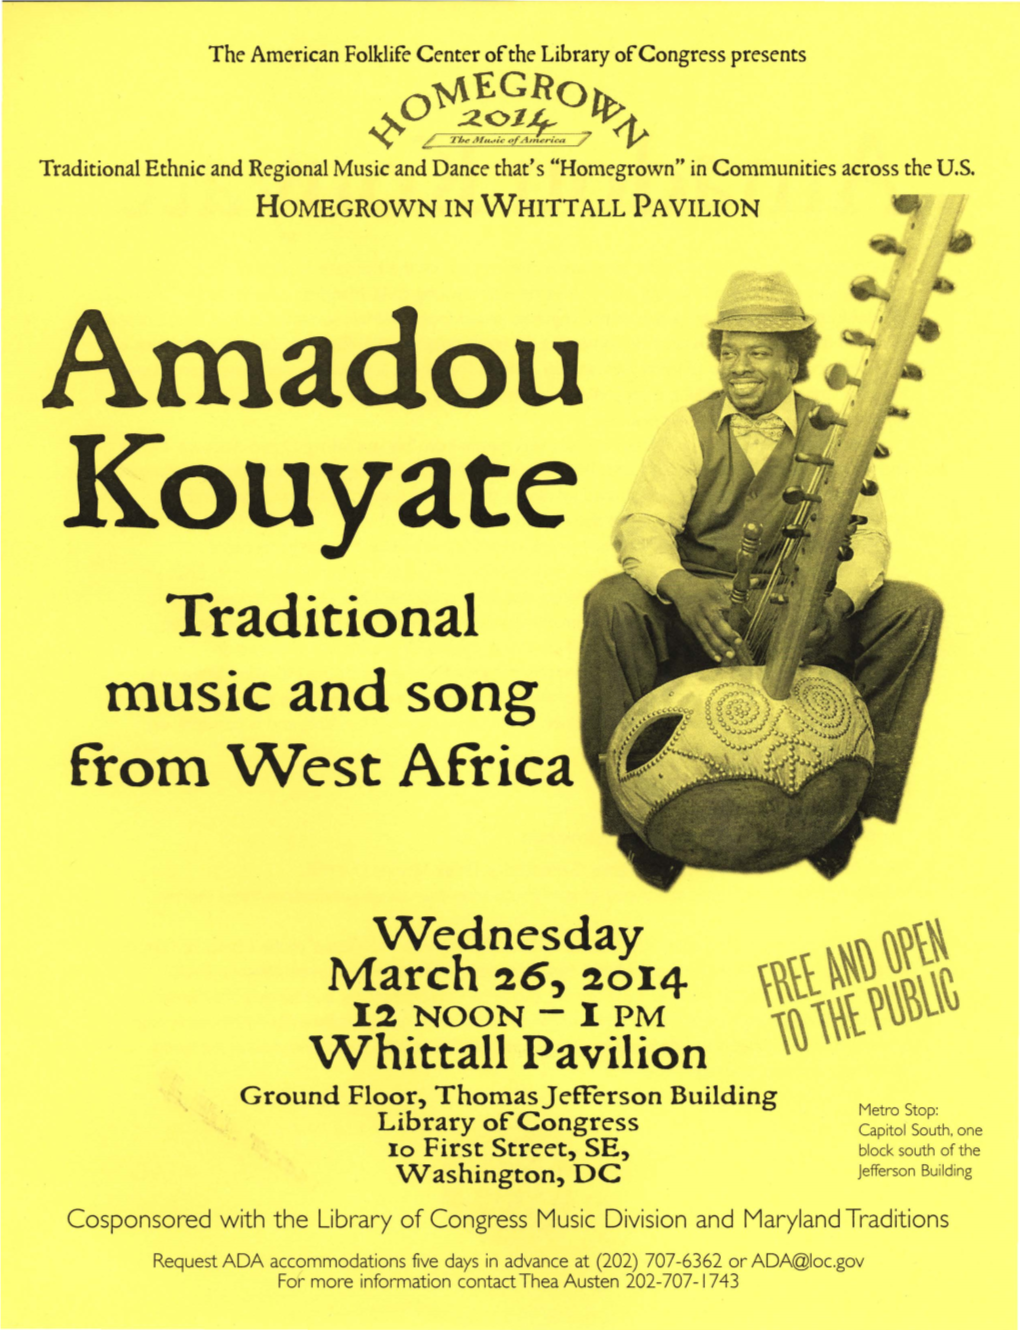 Amadou Kouyate: Traditional Music and Song from West Africa